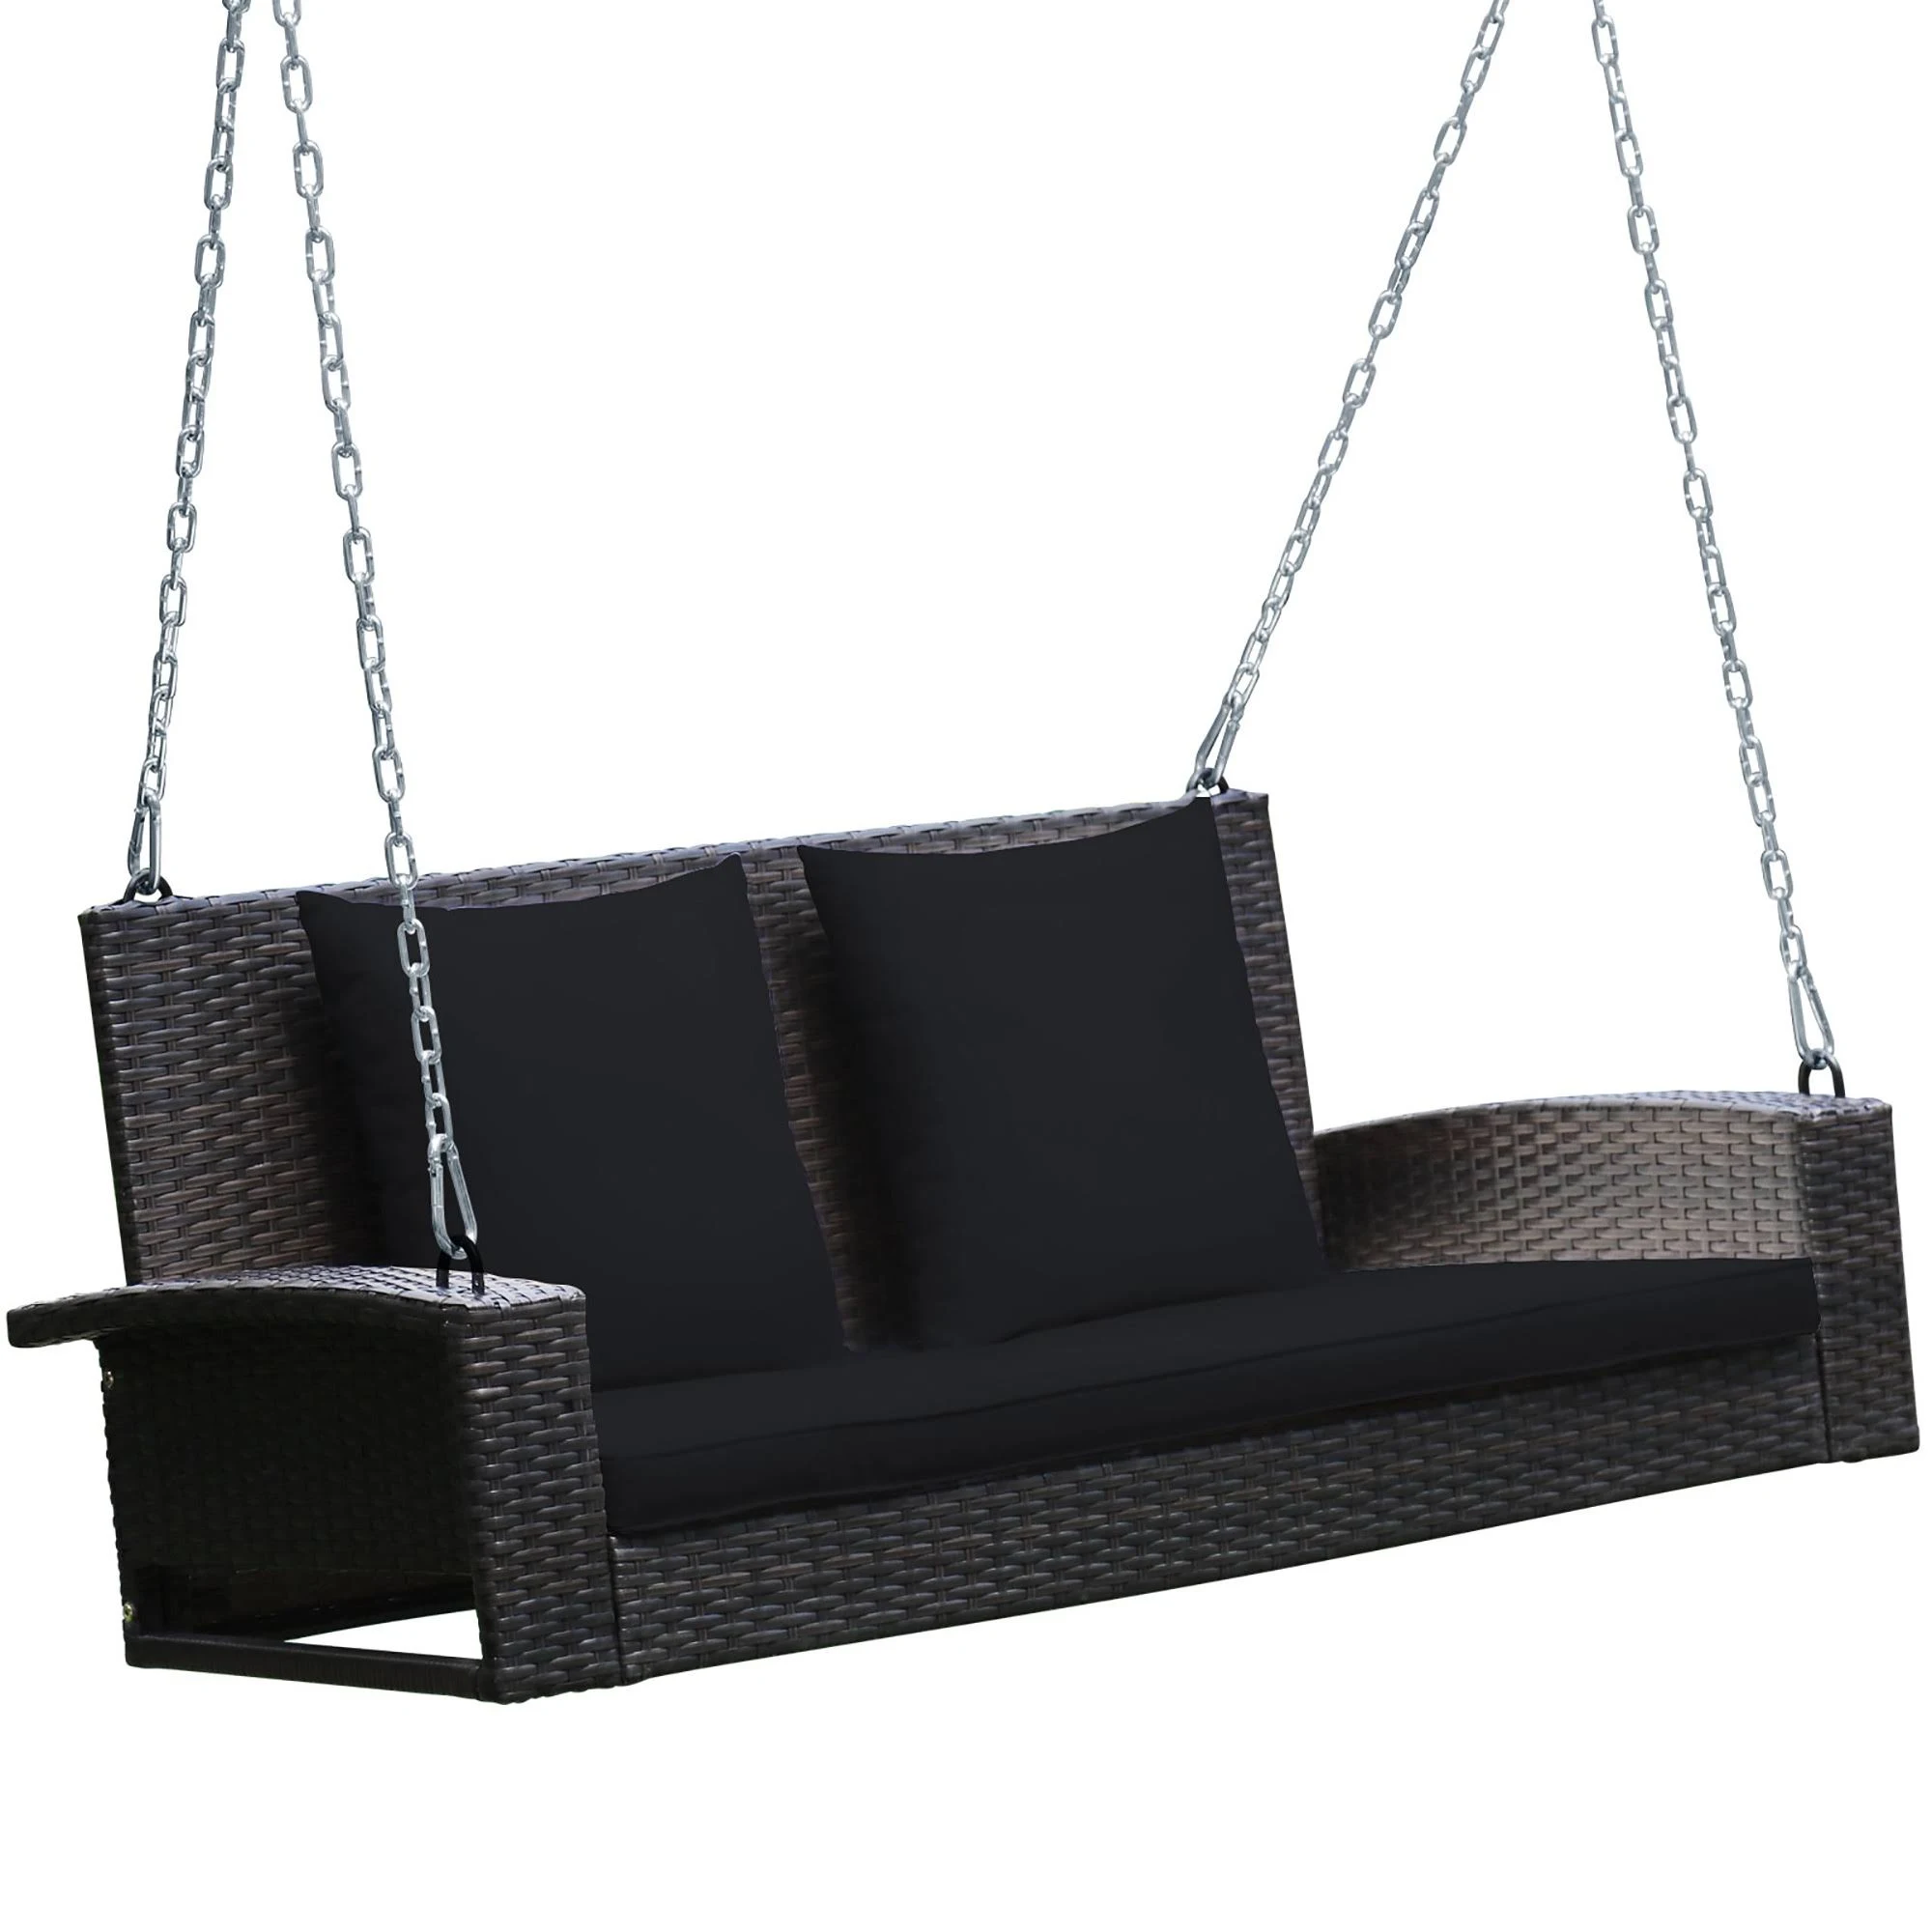 Costway 2-Person Patio Rattan Hanging Porch Swing Bench Chair Black Cushion